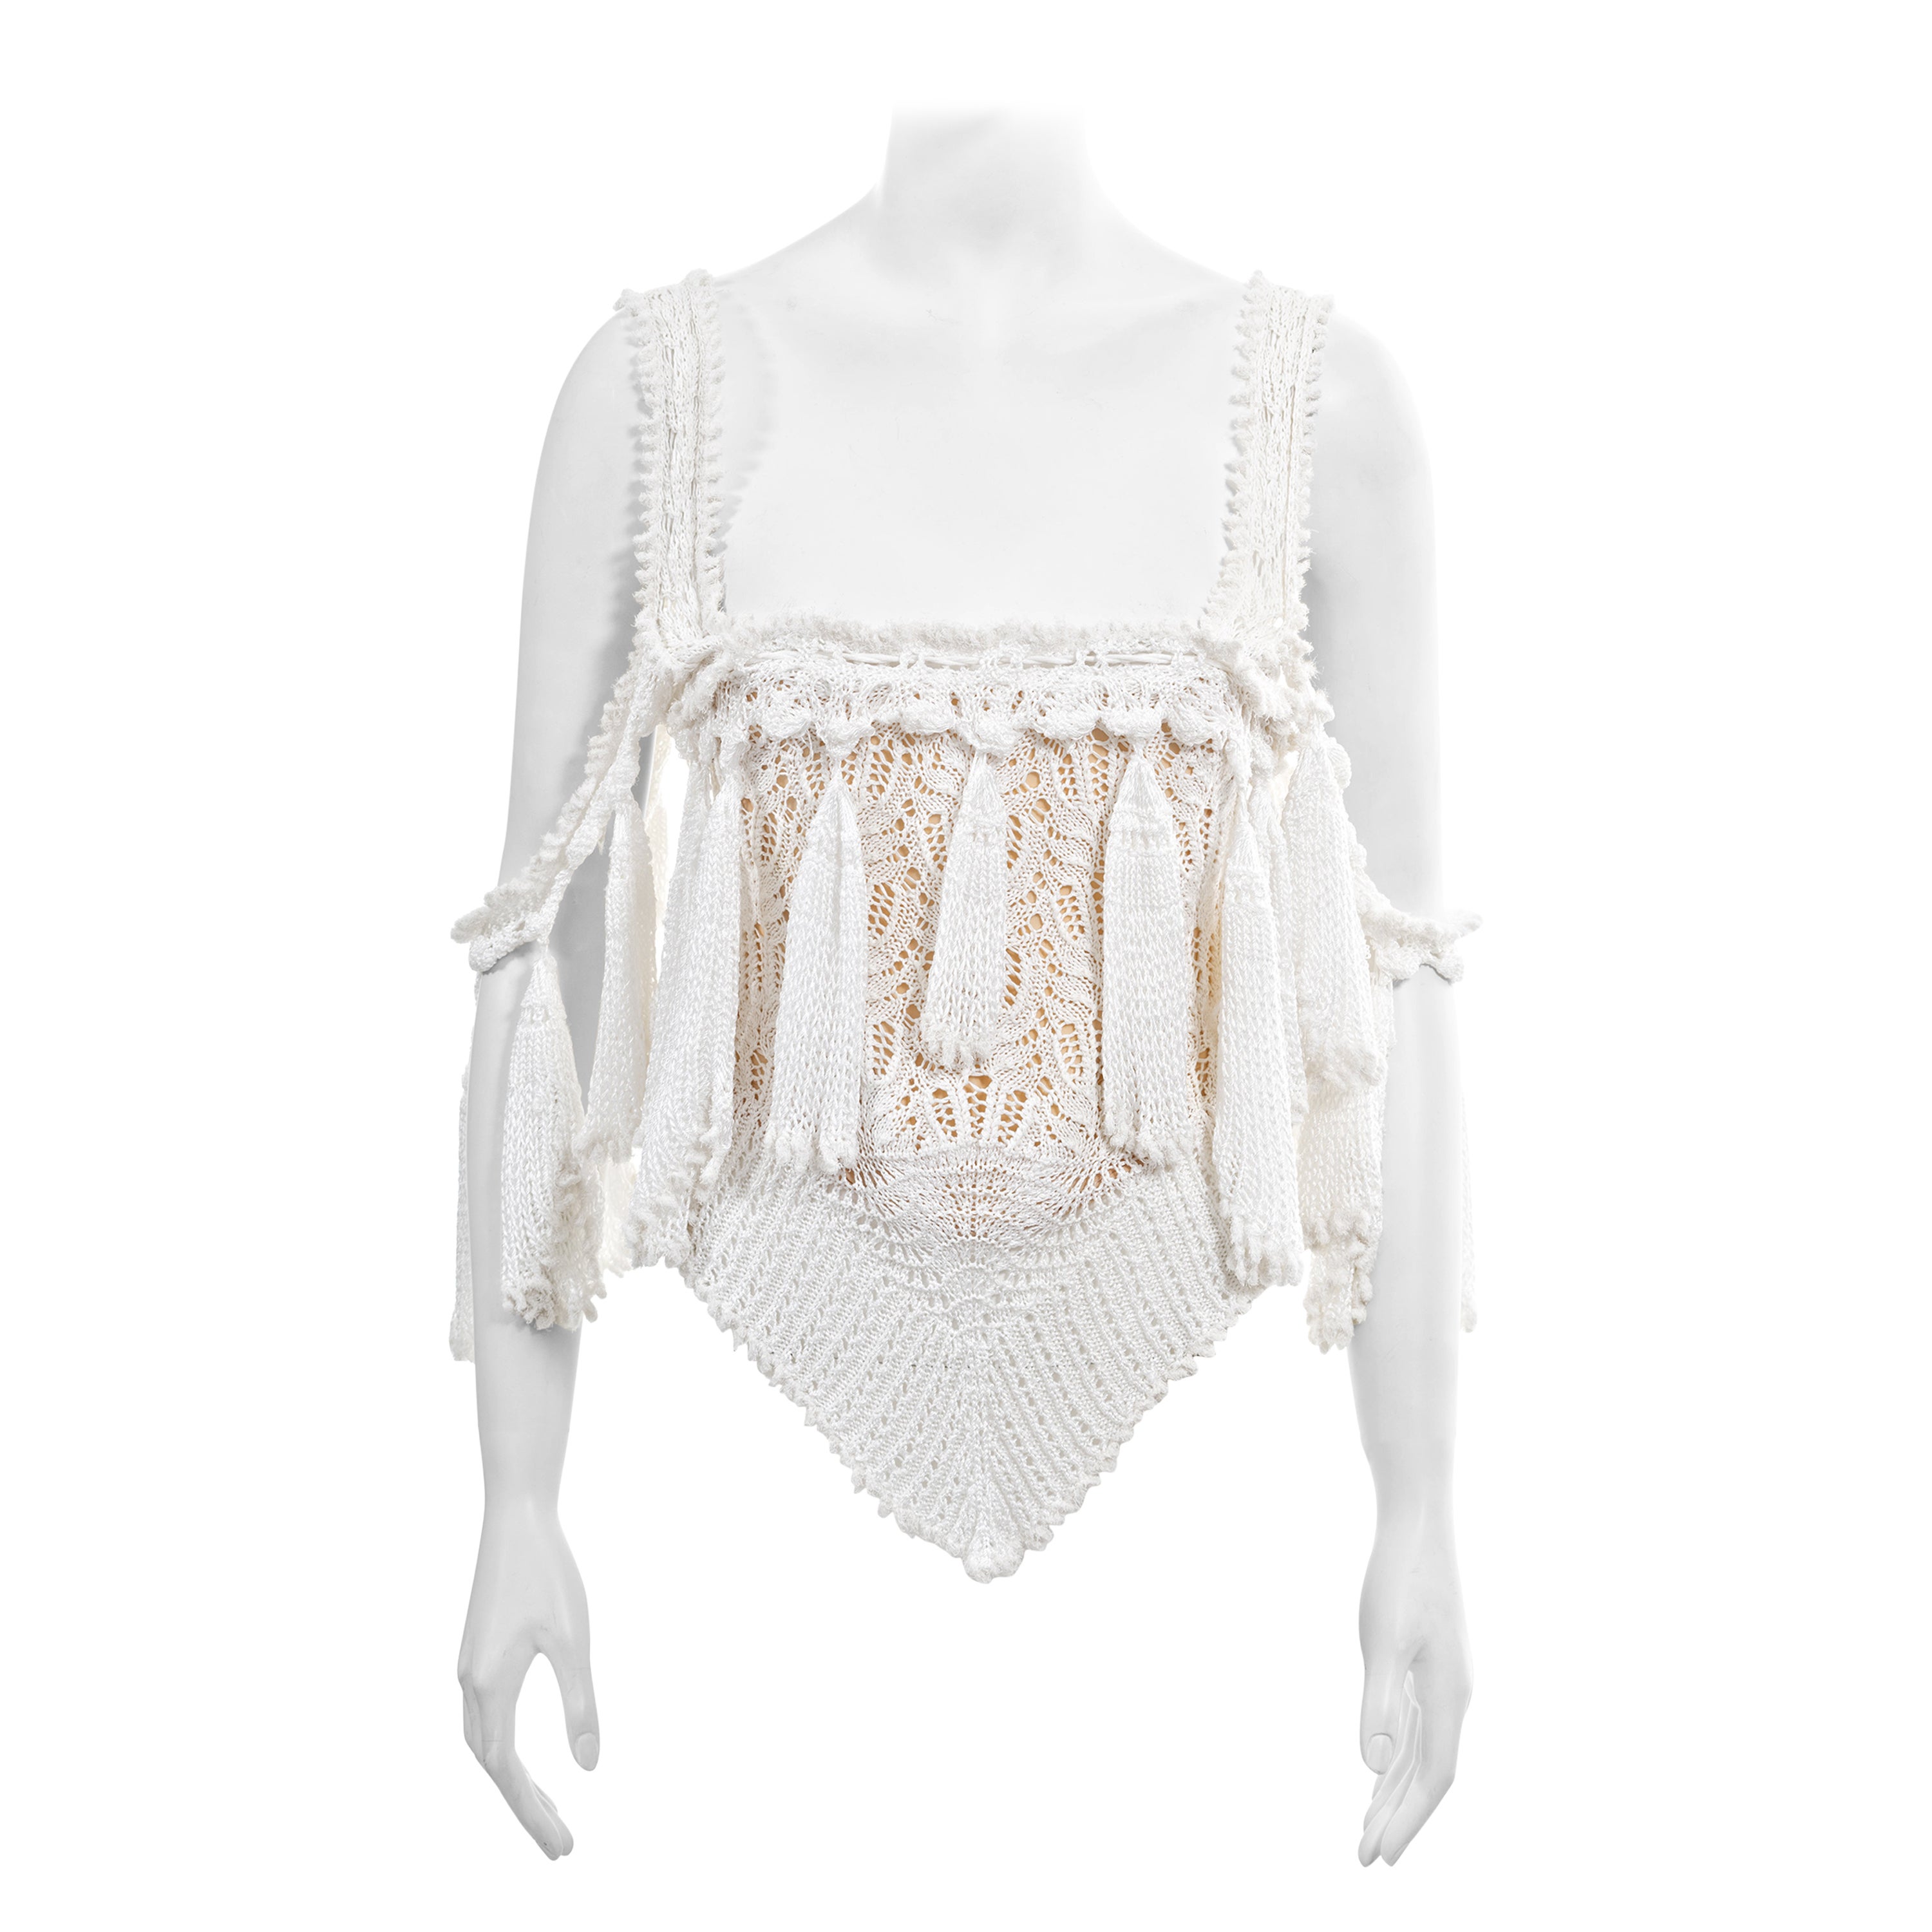 Vivienne Westwood 'Cafe Society' white knitted lace corset, ss 1994 For Sale